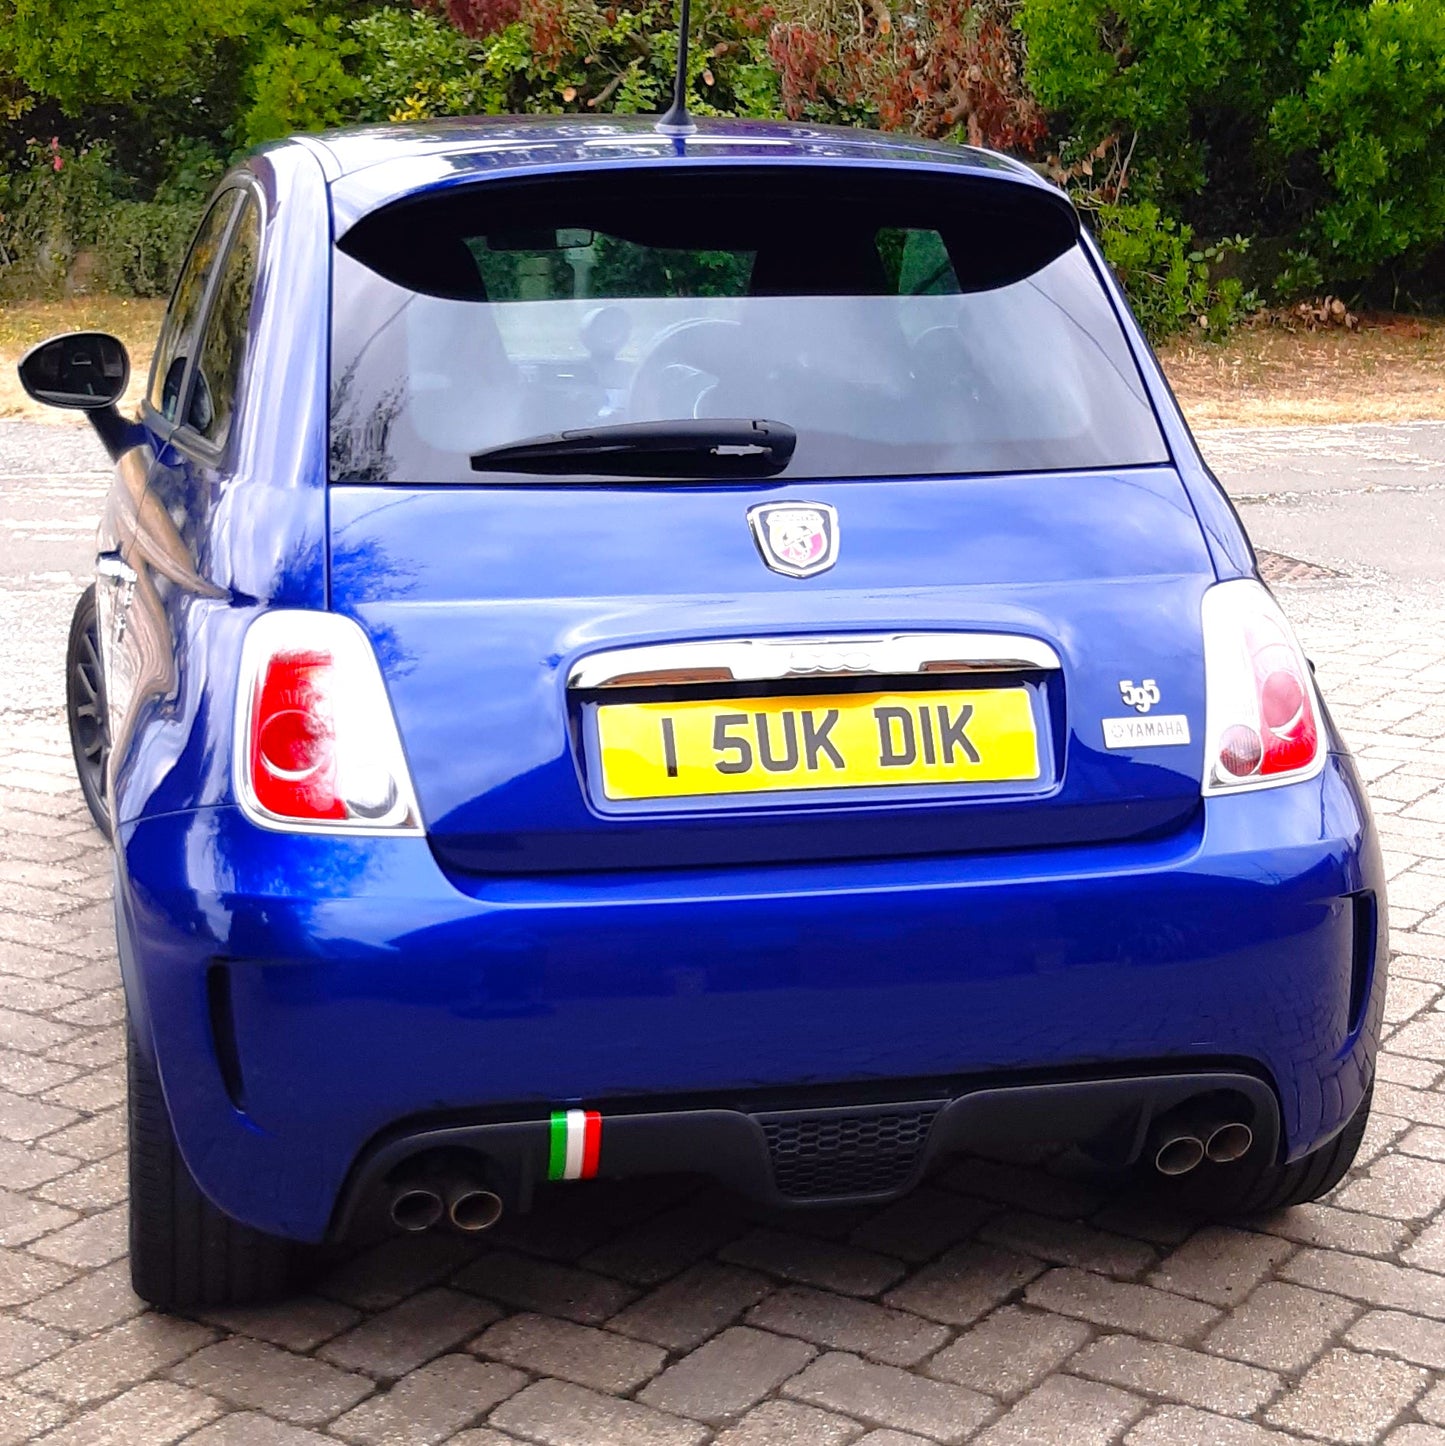 2 Joke Number Plate Stickers With "I 5UK DIK"